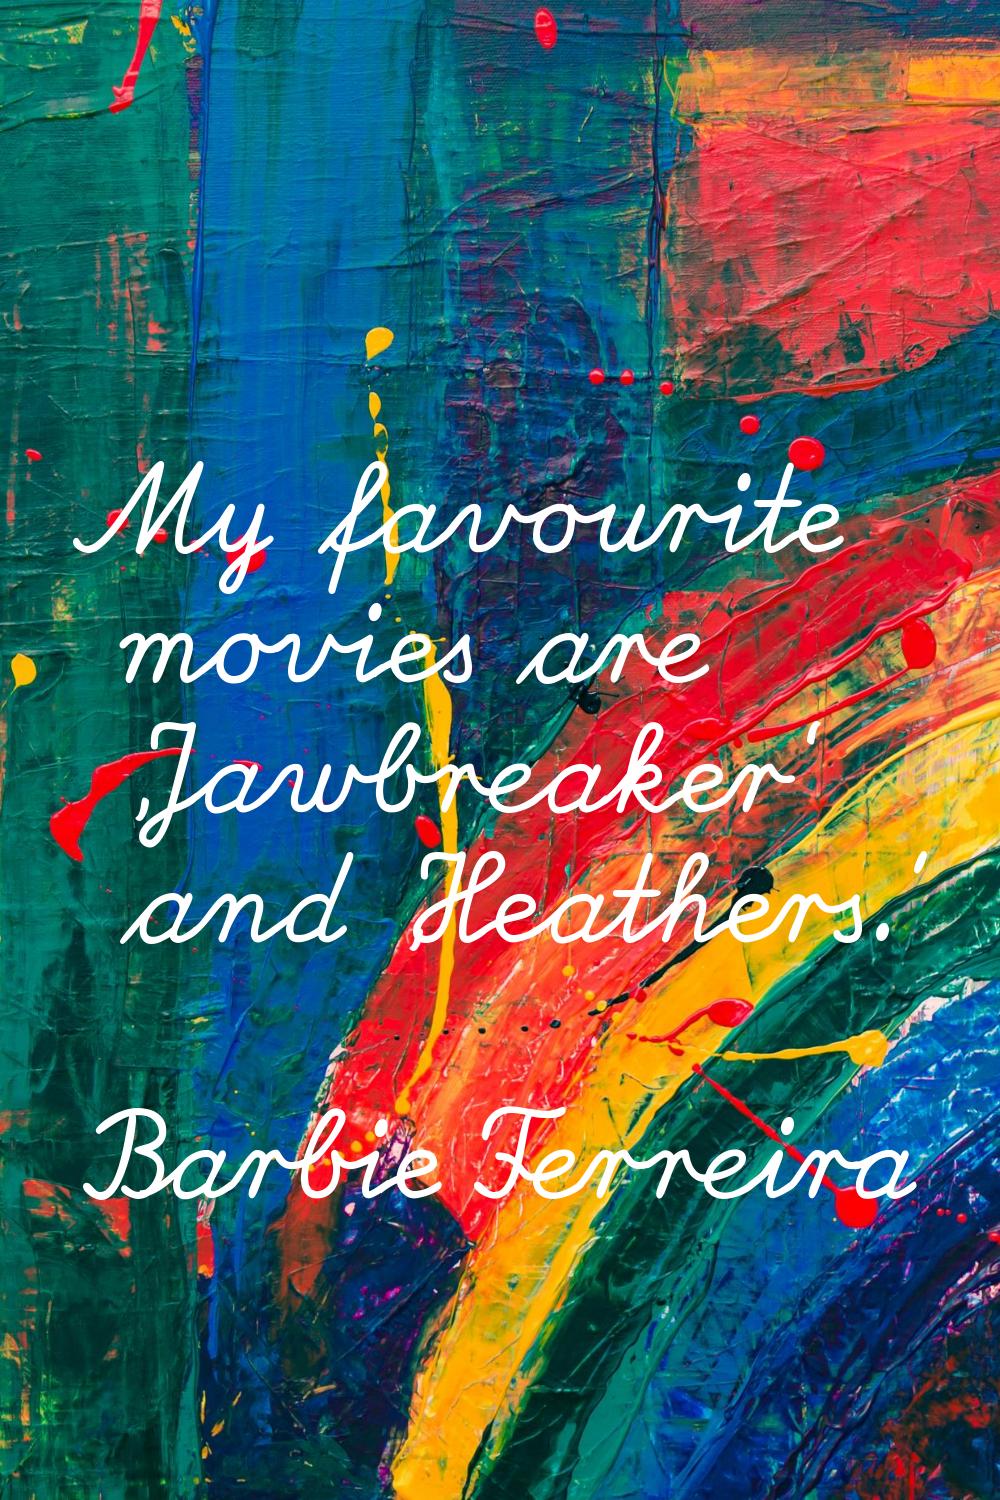 My favourite movies are 'Jawbreaker' and 'Heathers.'